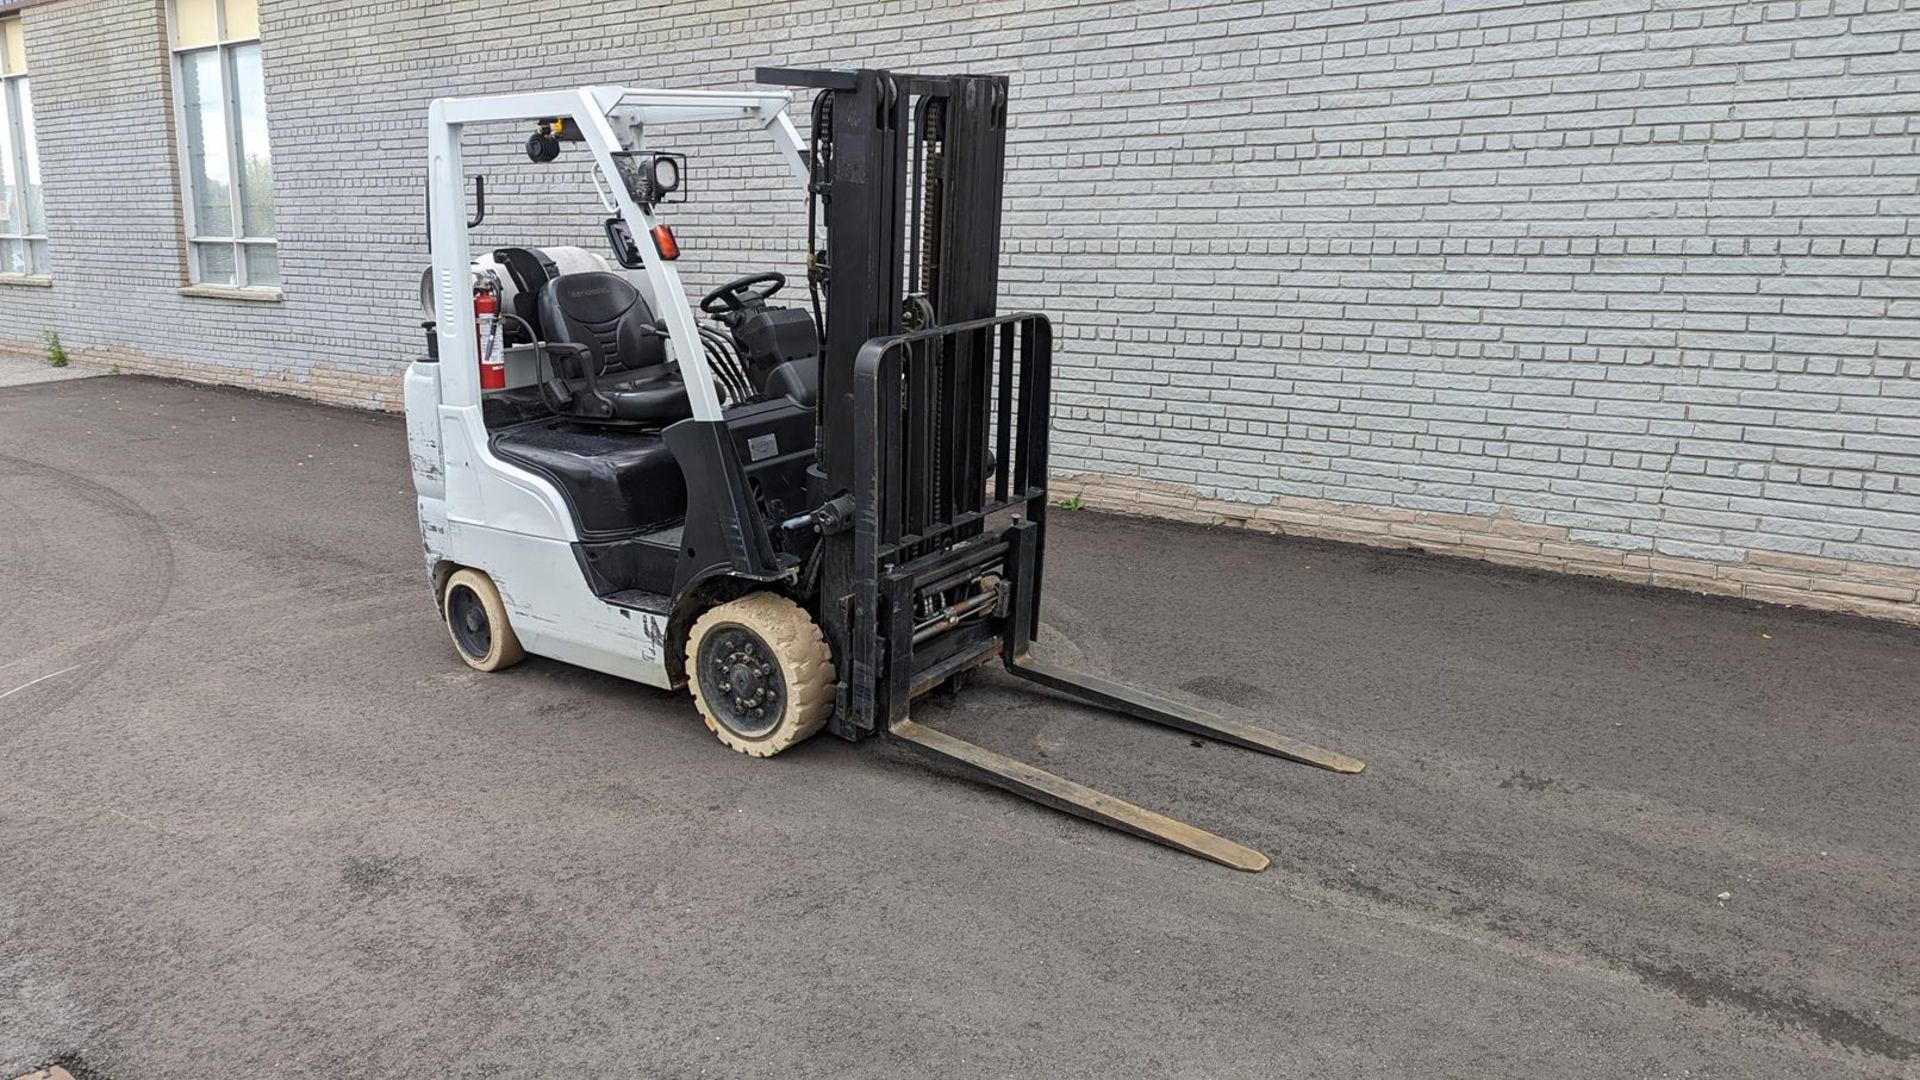 2018, UNICARRIERS, MCP1F2A25LV, 4,400 LBS., 3 STAGE, LPG FORKLIFT, SIDESHIFT - Image 7 of 17